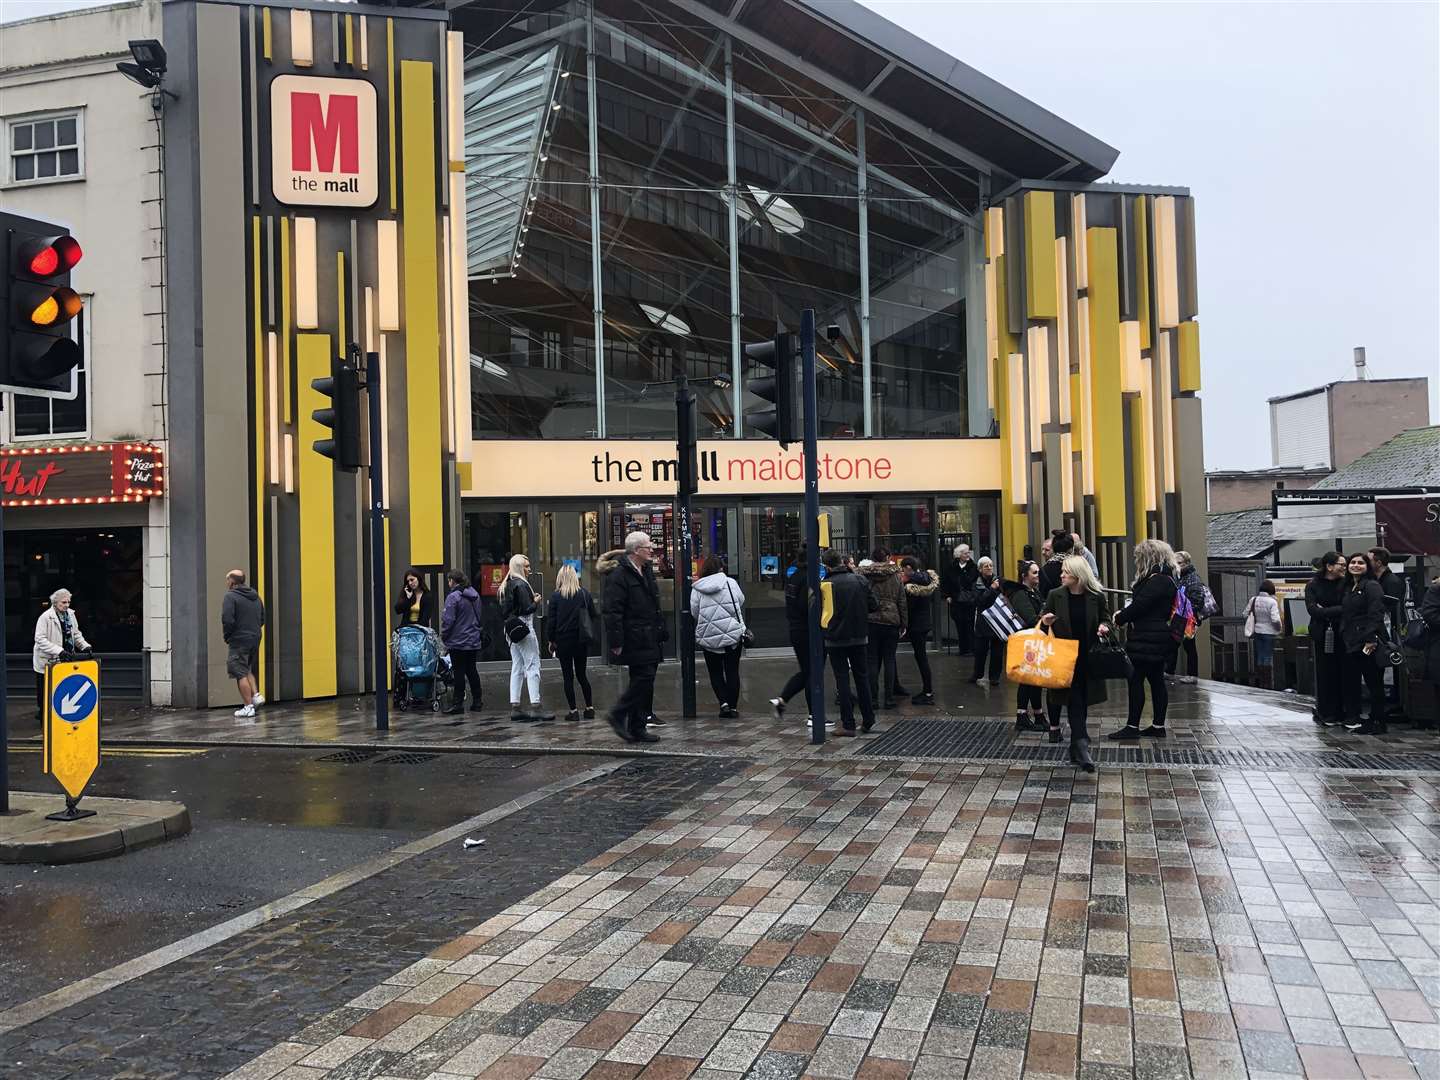 Shoppers were unable to get into the Mall in Maidstone